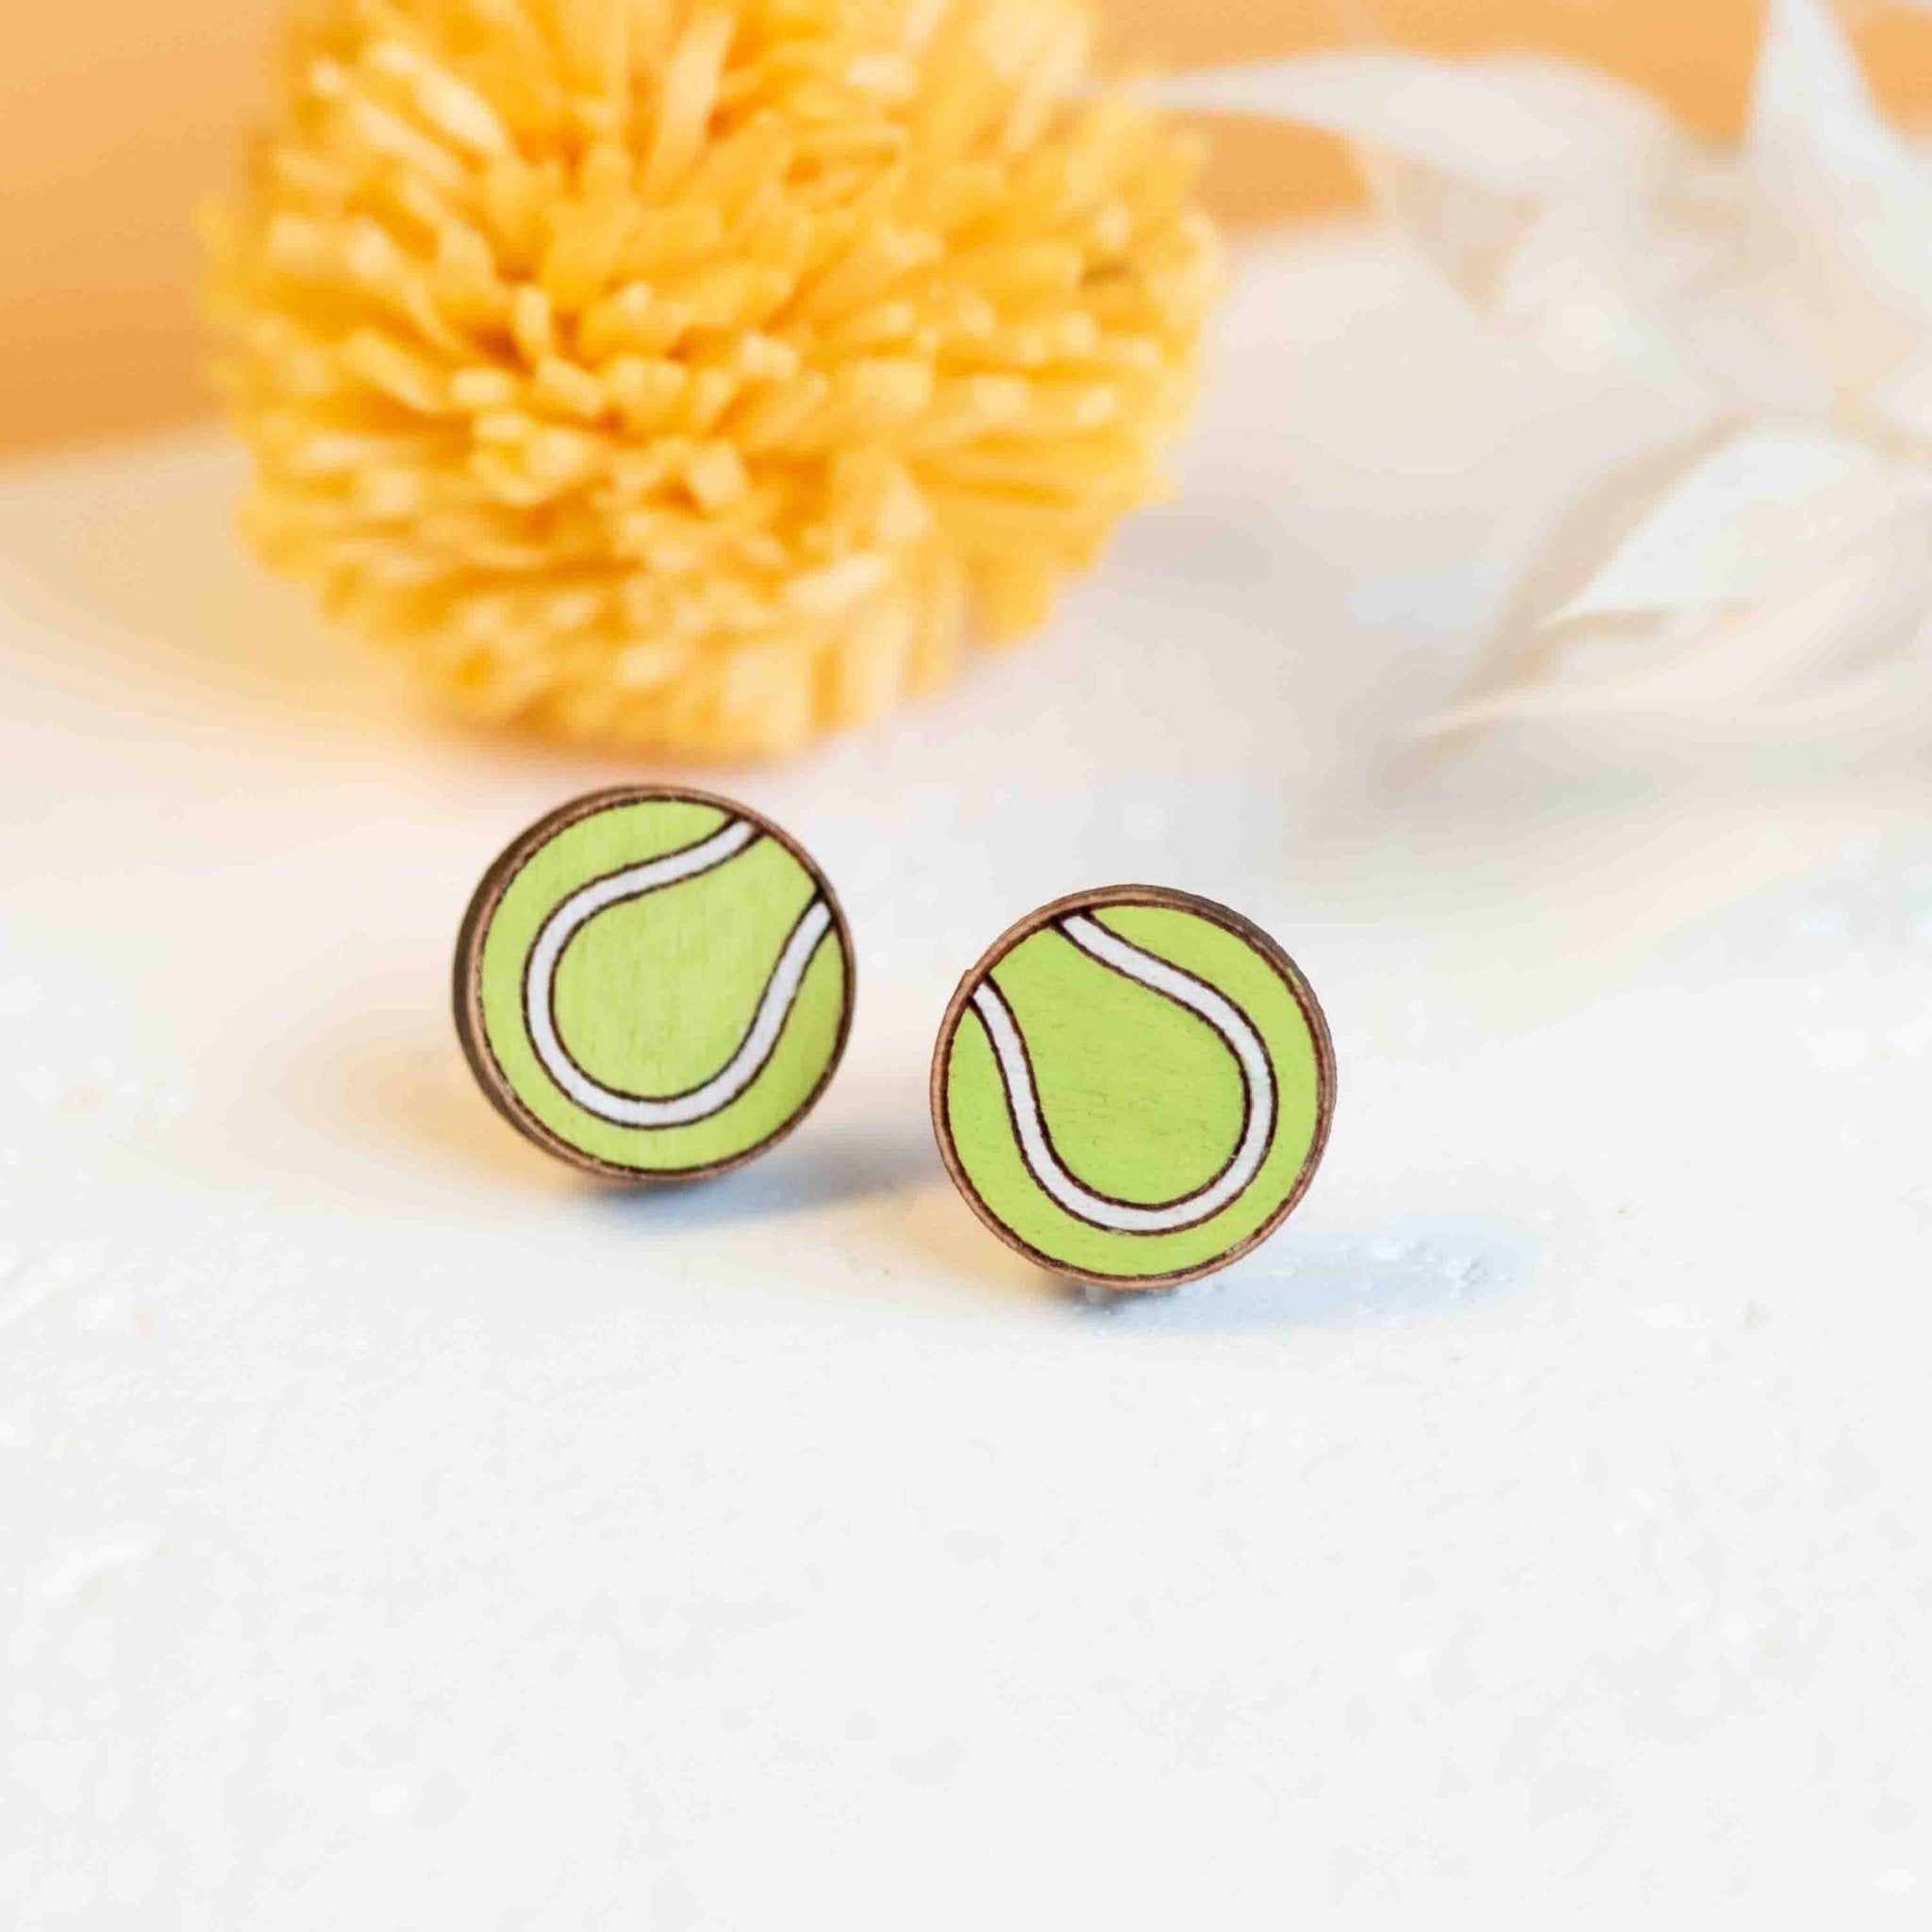 Hand-painted Tennis Ball Earrings Wooden Jewellery - PET15197 - Robin Valley Official Store